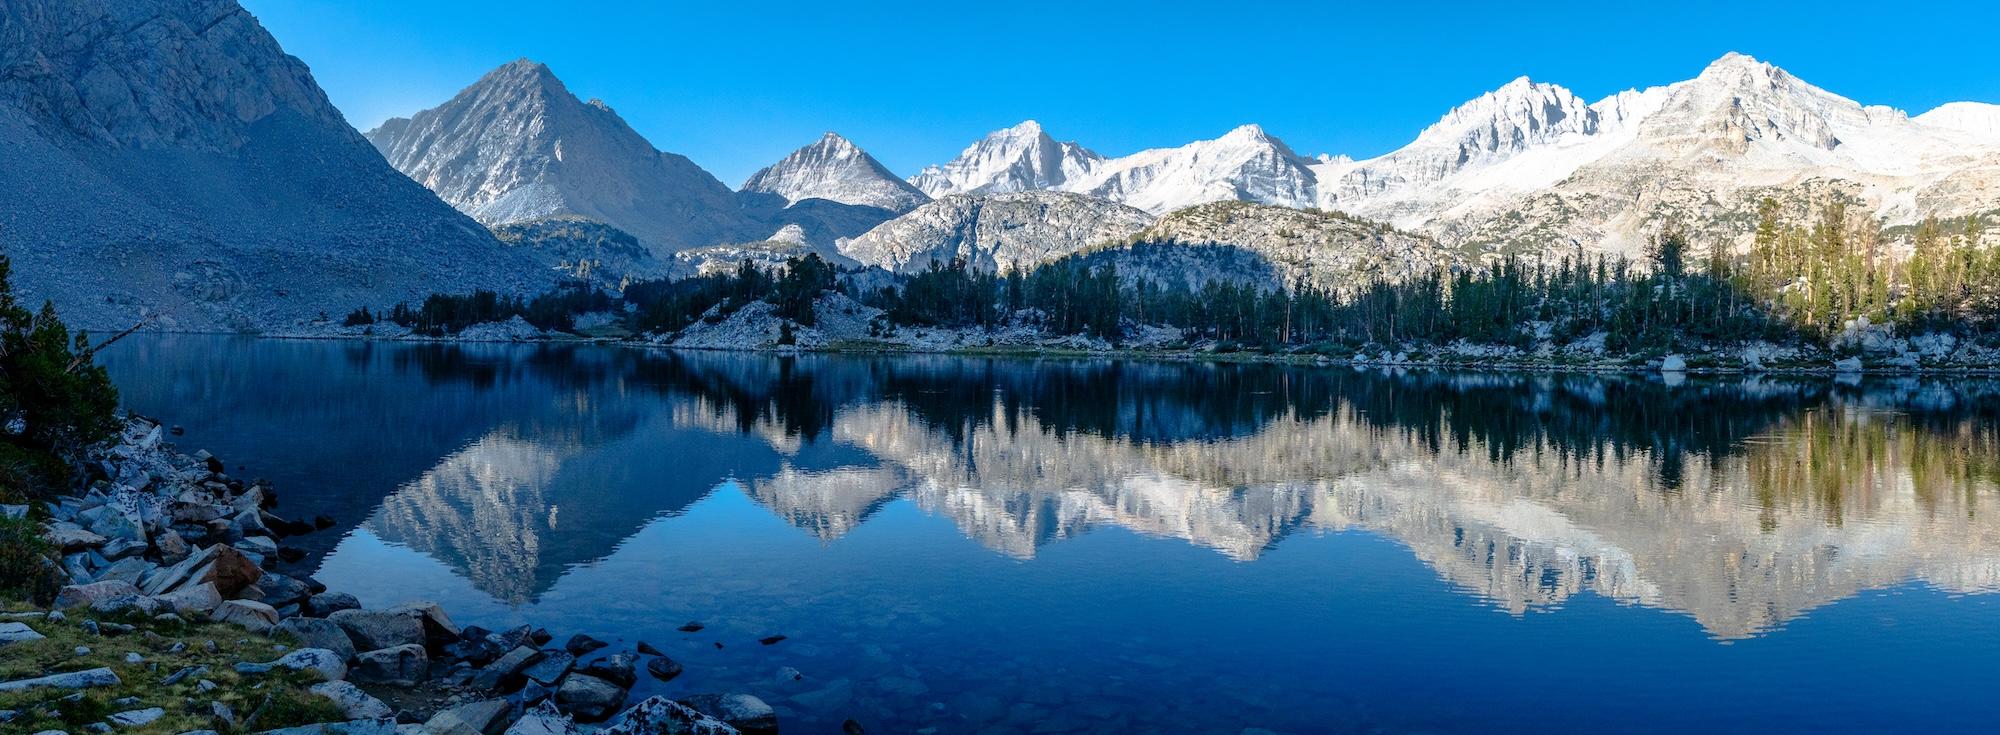 Panorama of a mountain reflection at Chickenfoot Lake in The Little Lakes Valley of the Sierras. Photo by Brock Dallman